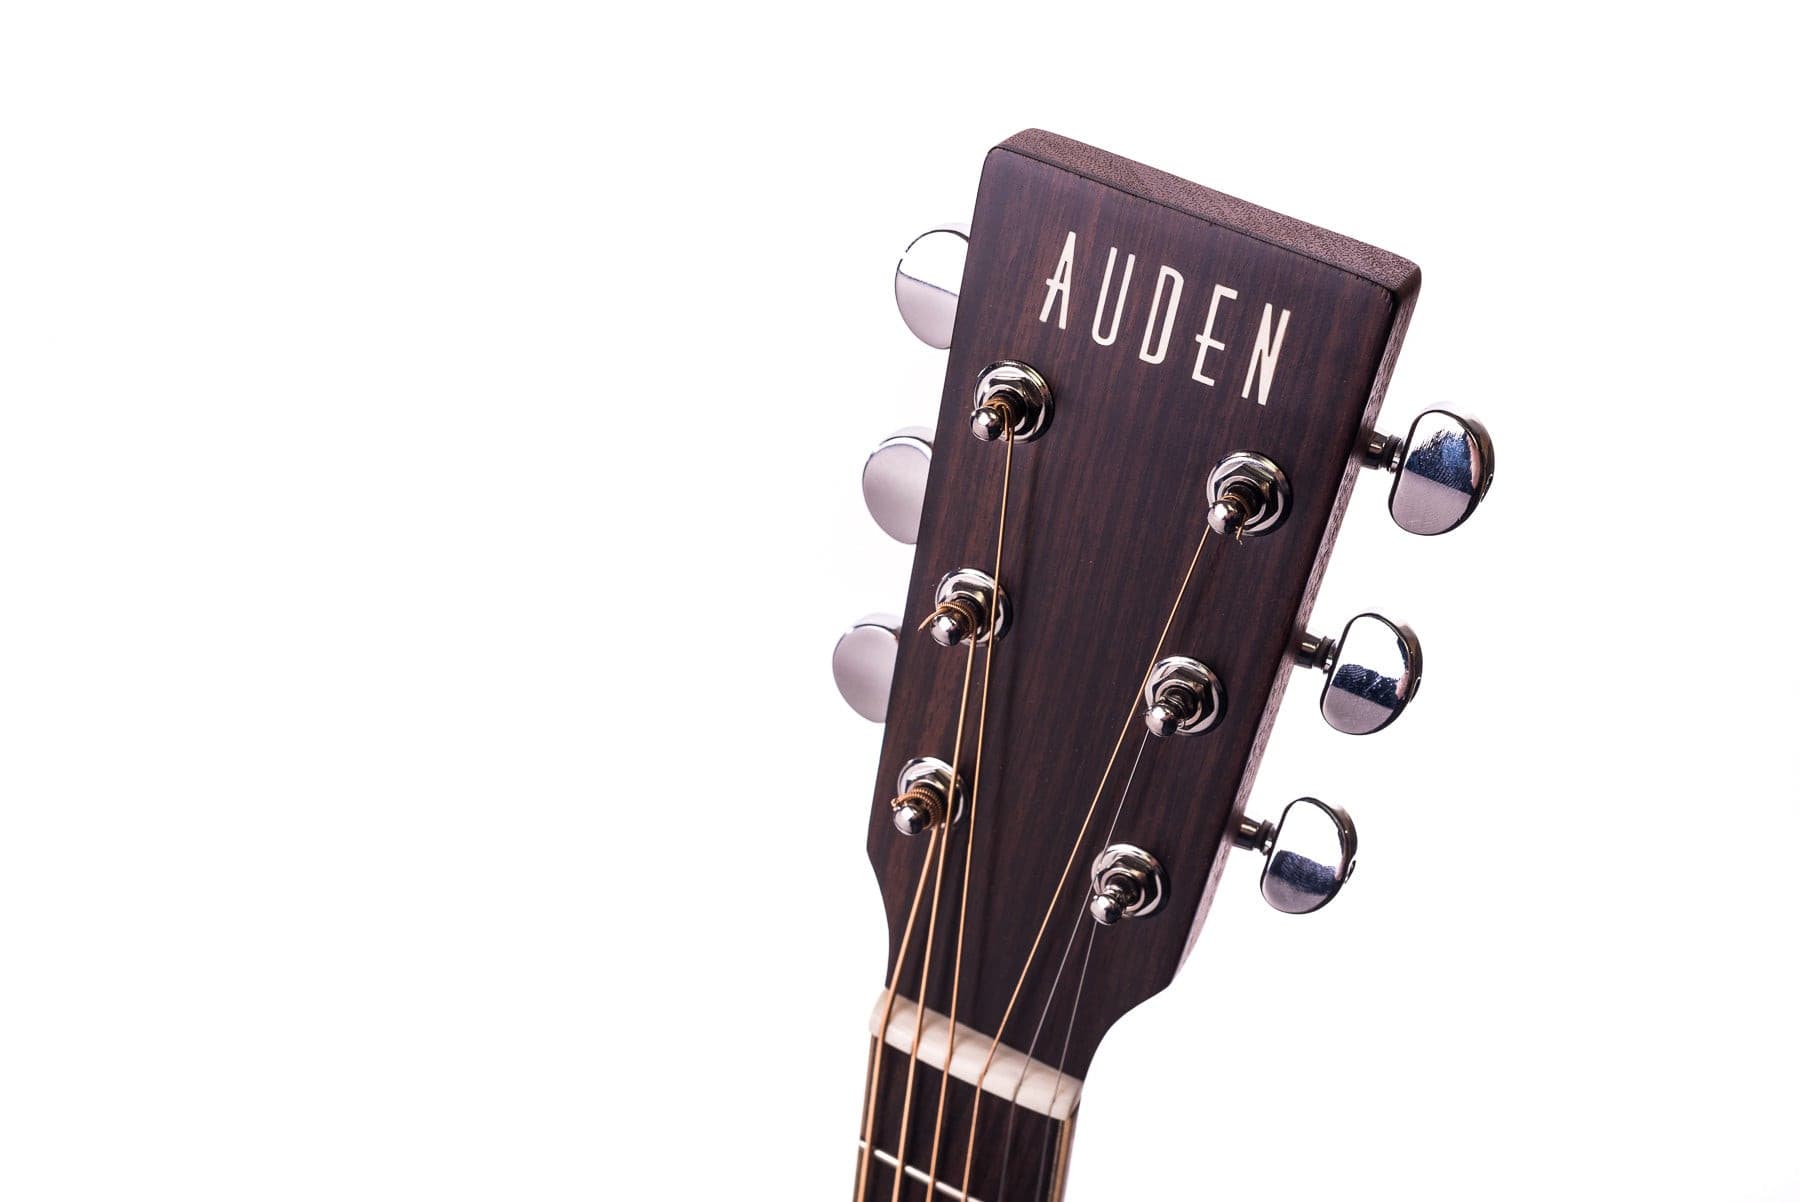 AUDEN NEO SERIES- CHESTER FULL BODY, Electro Acoustic Guitar for sale at Richards Guitars.